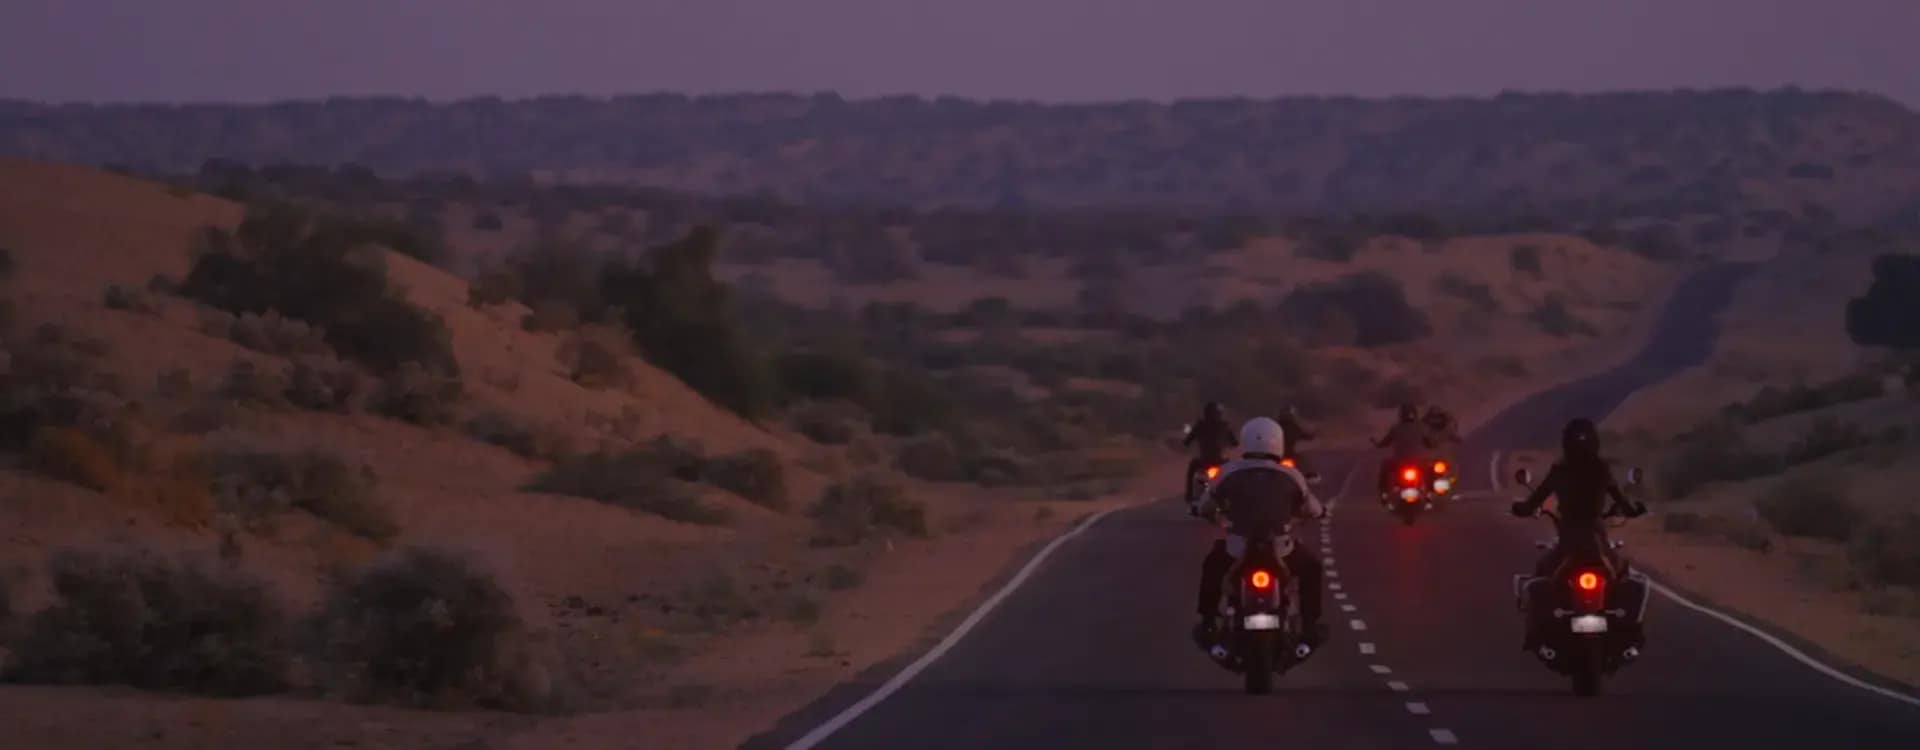 Royal Enfield Super Meteor 650 Thematic Video 